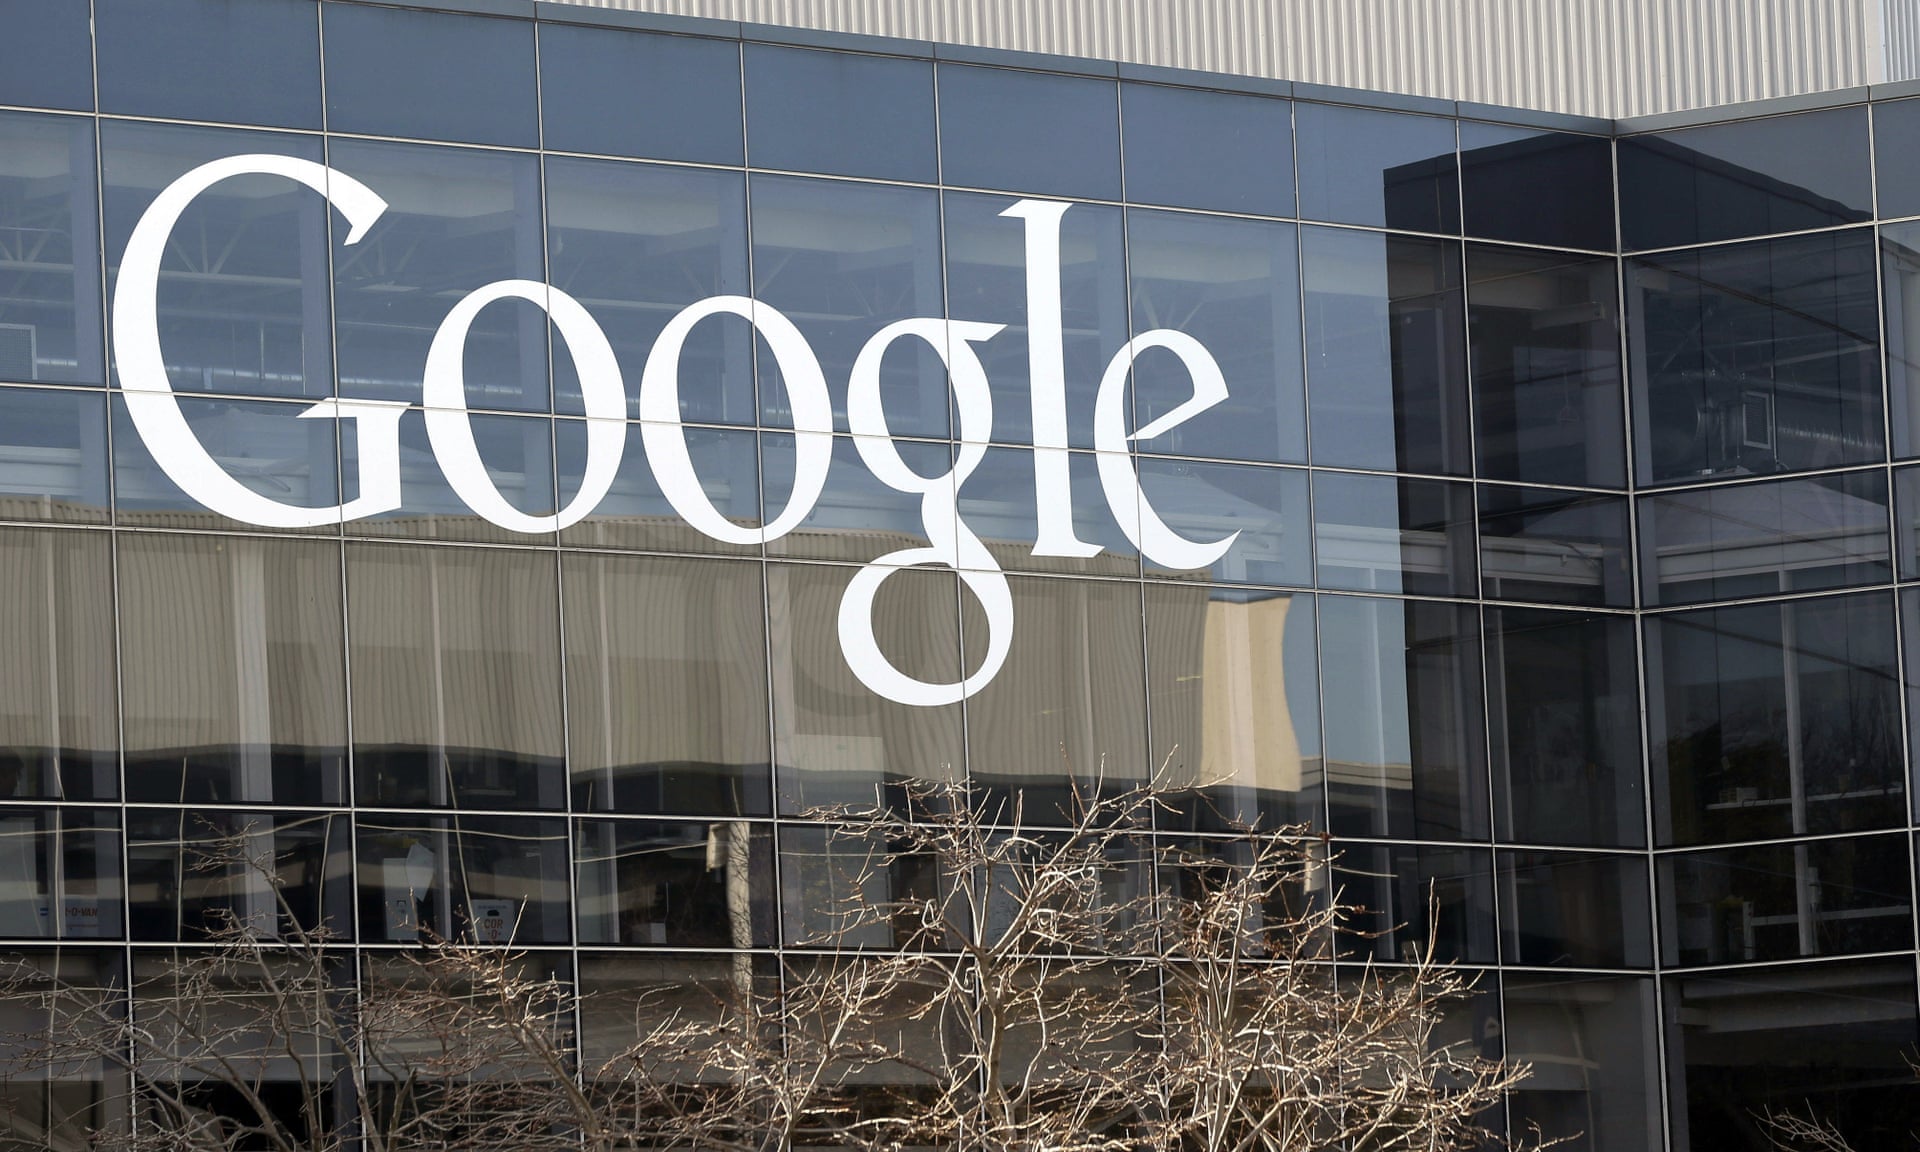 A US antitrust suit might break up Google. Good – it's the Standard Oil of our day